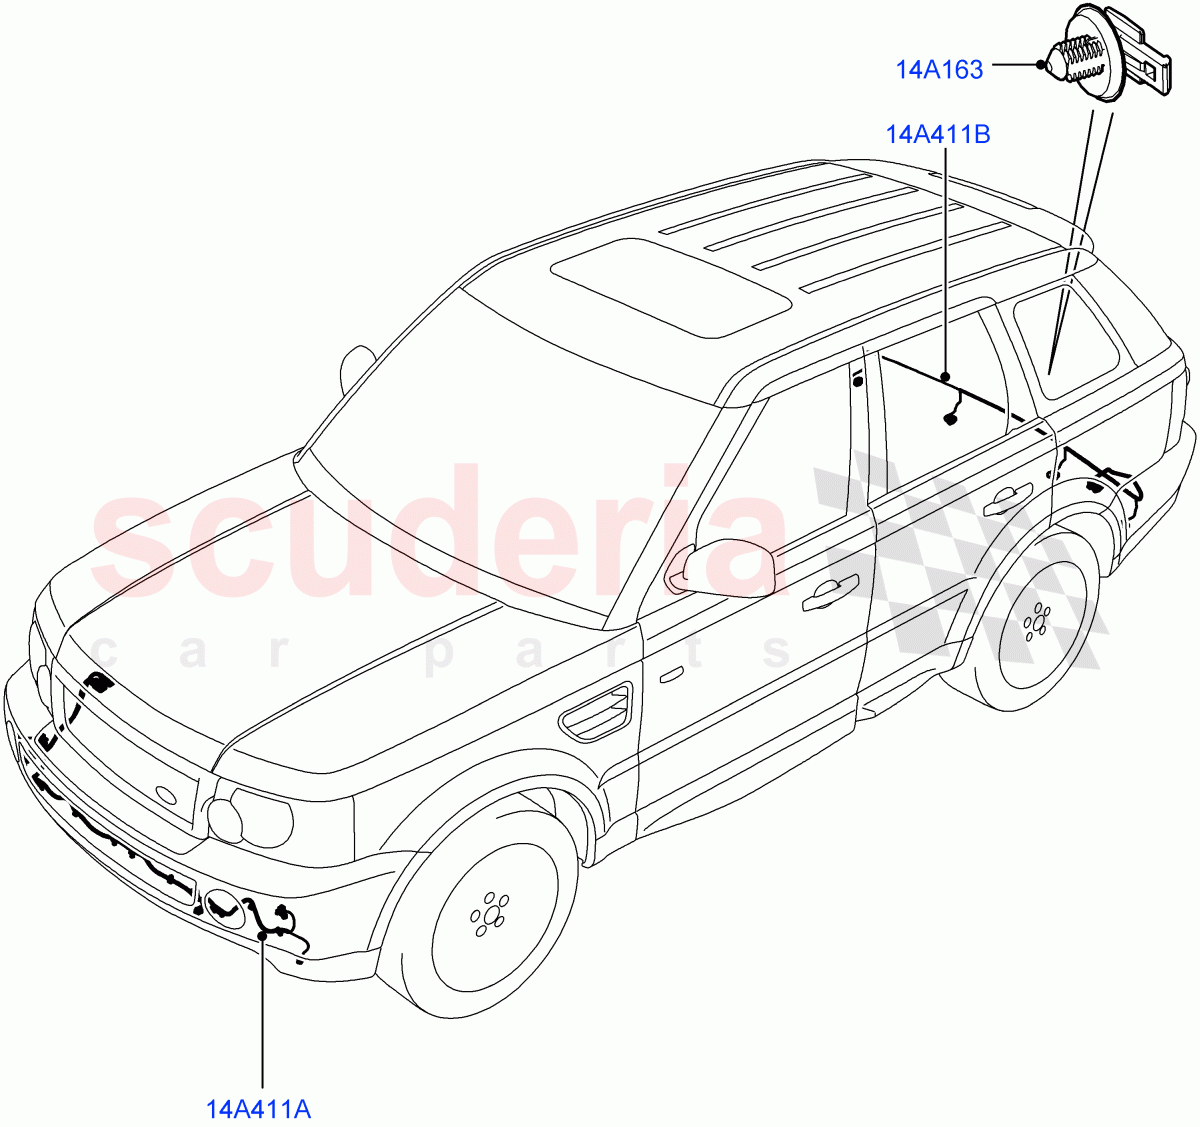 Electrical Wiring - Body And Rear(Bumper)((V)TO9A999999) of Land Rover Land Rover Range Rover Sport (2005-2009) [3.6 V8 32V DOHC EFI Diesel]